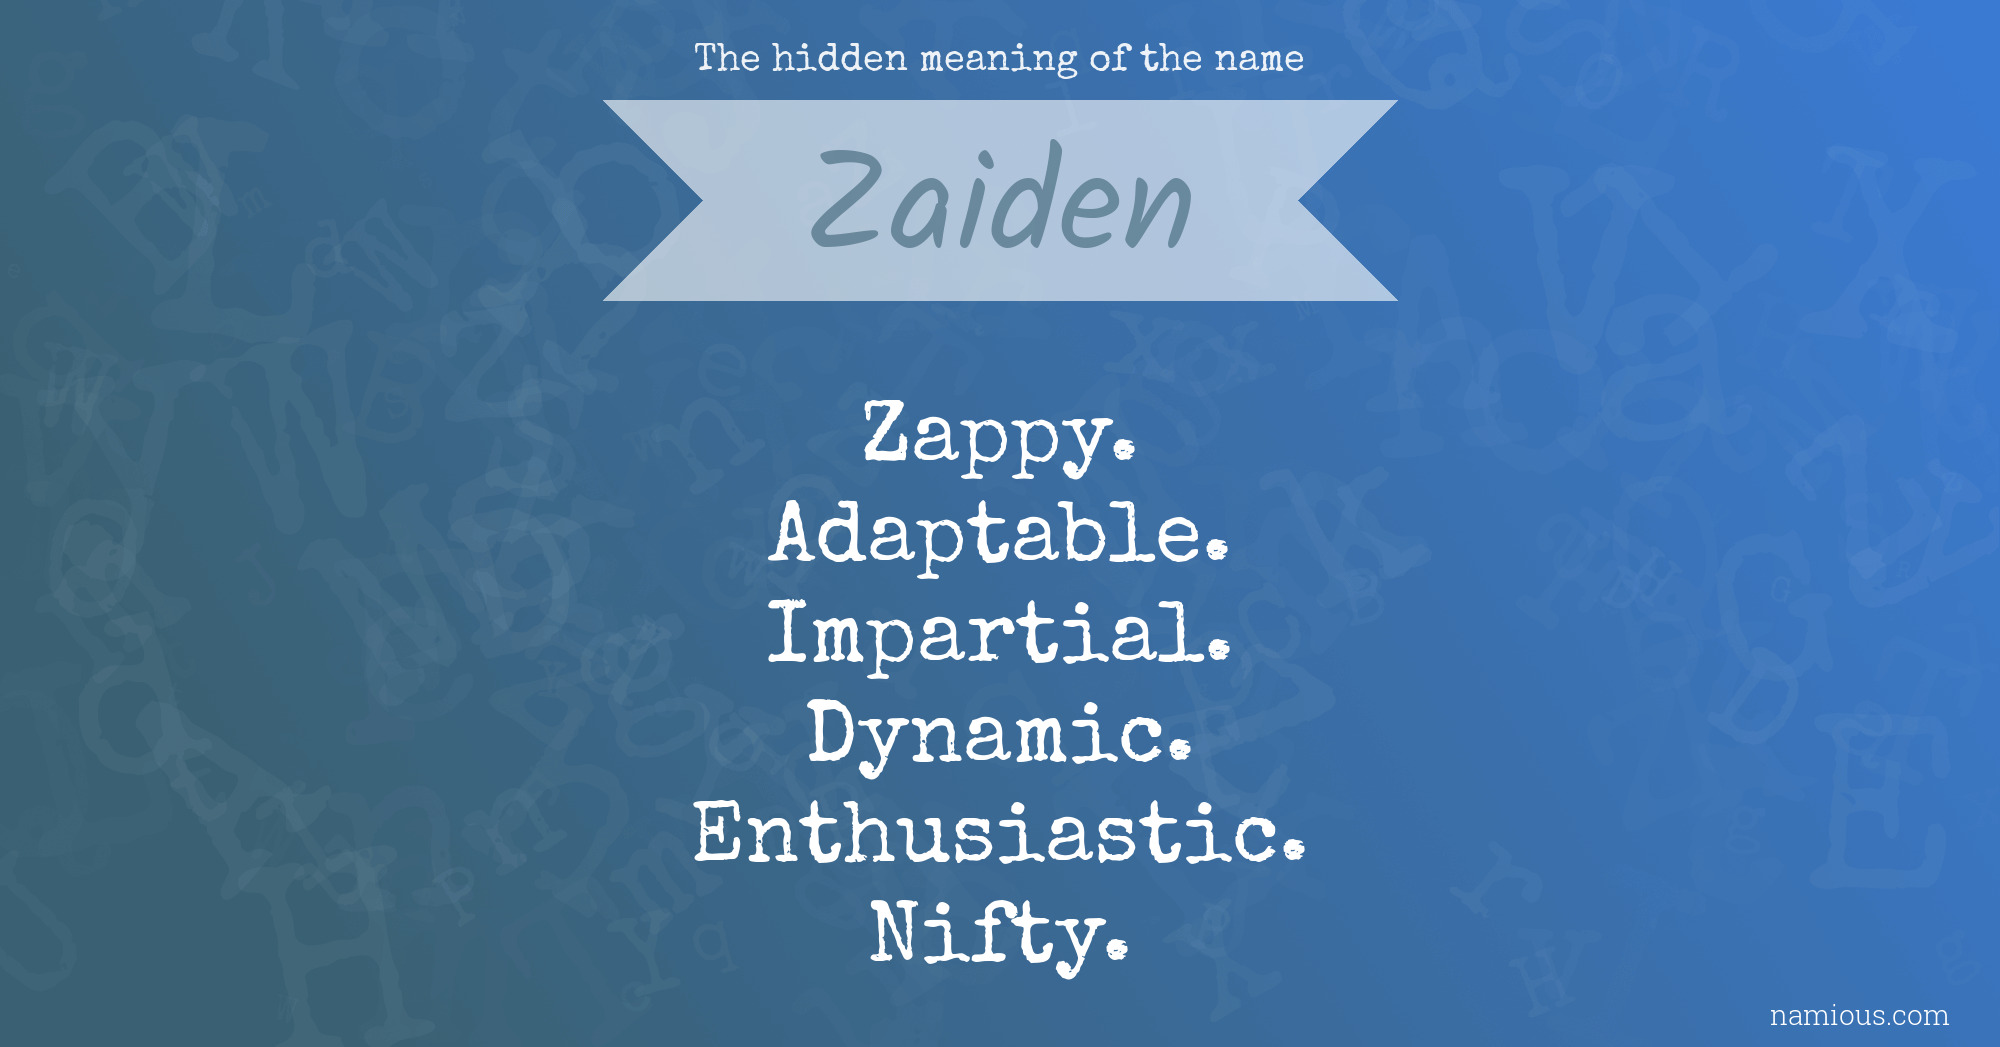 The hidden meaning of the name Zaiden